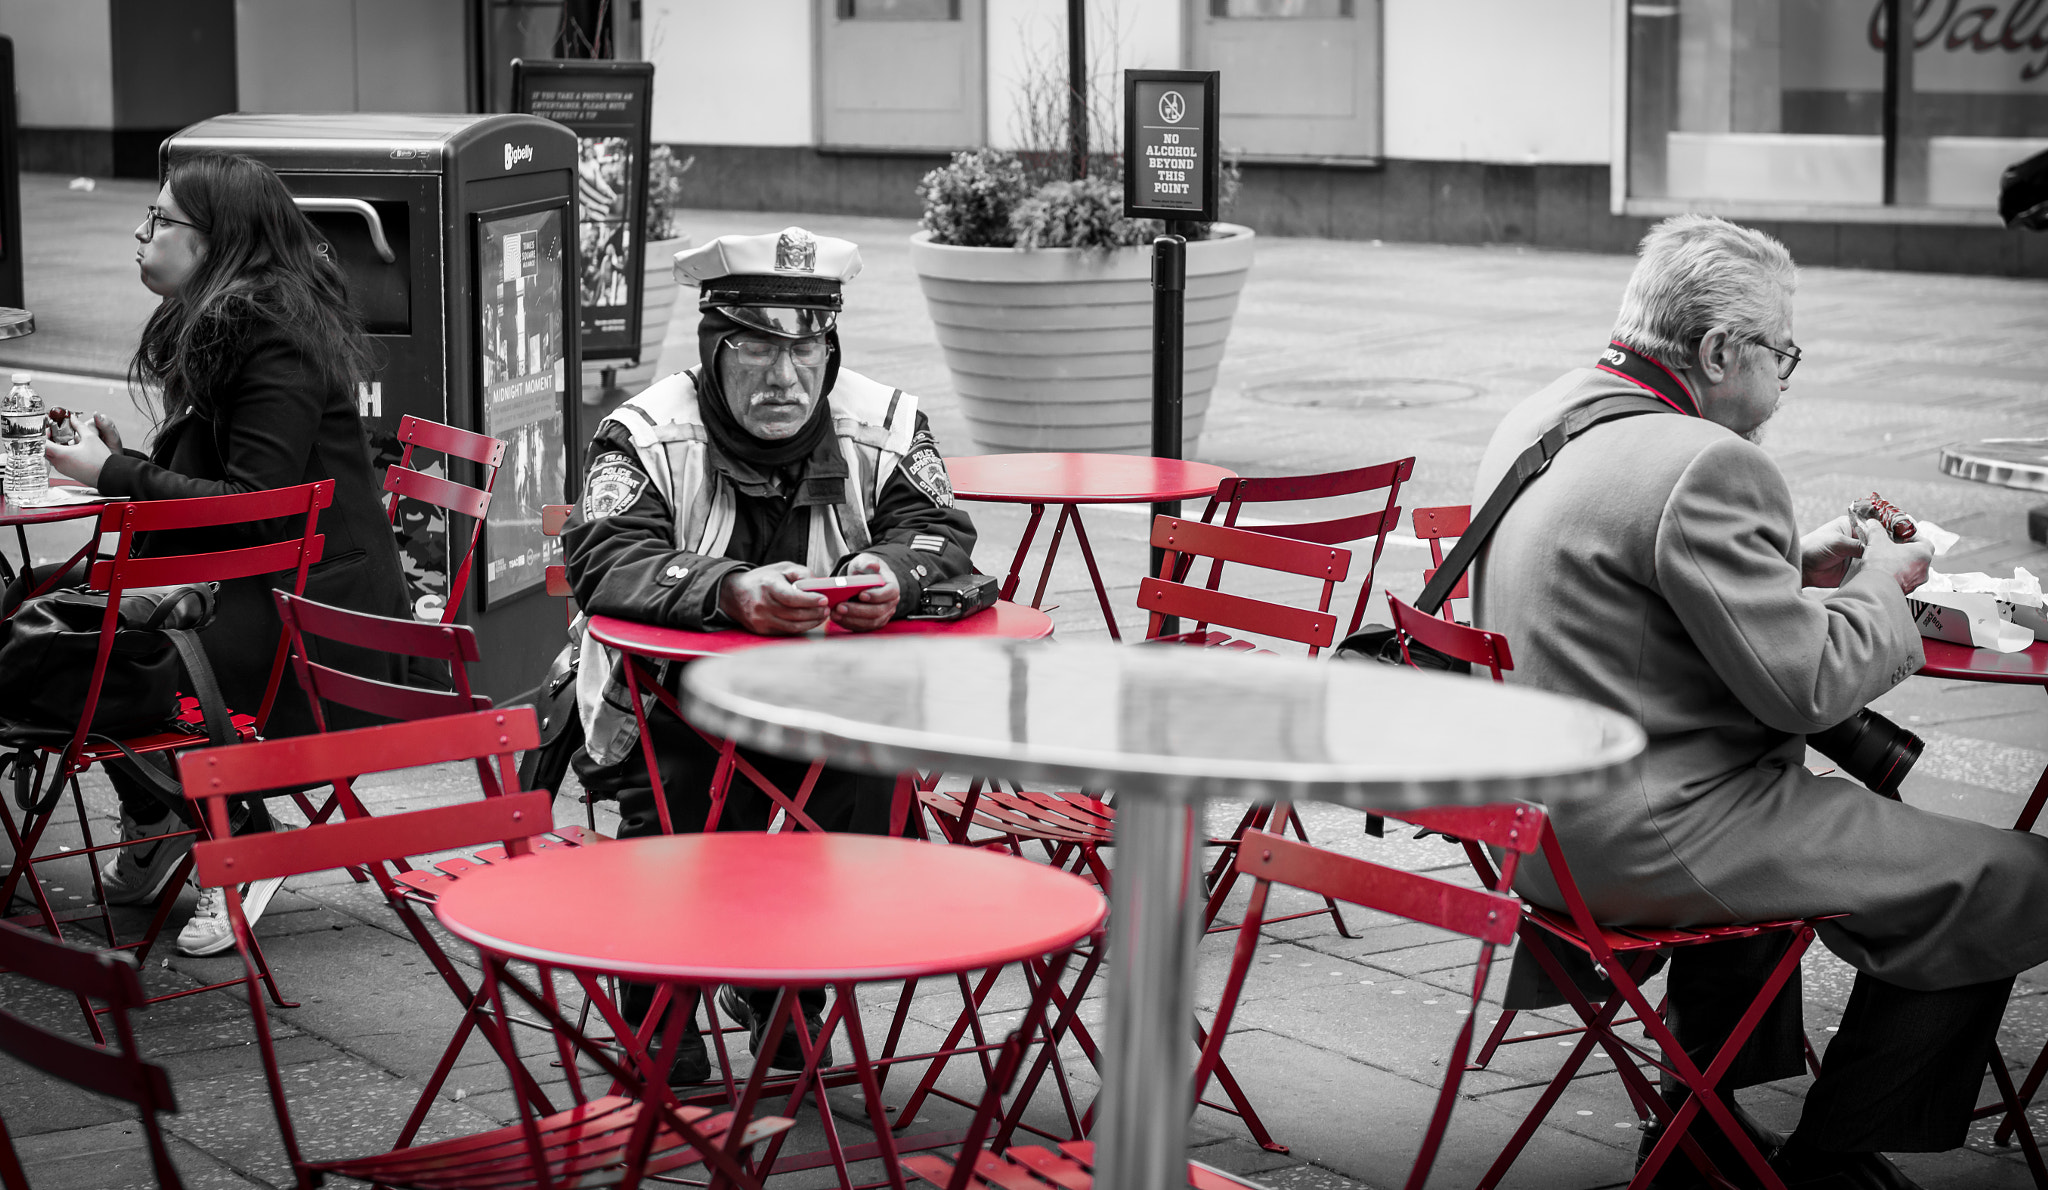 Nikon D600 sample photo. Breaktime in times square photography